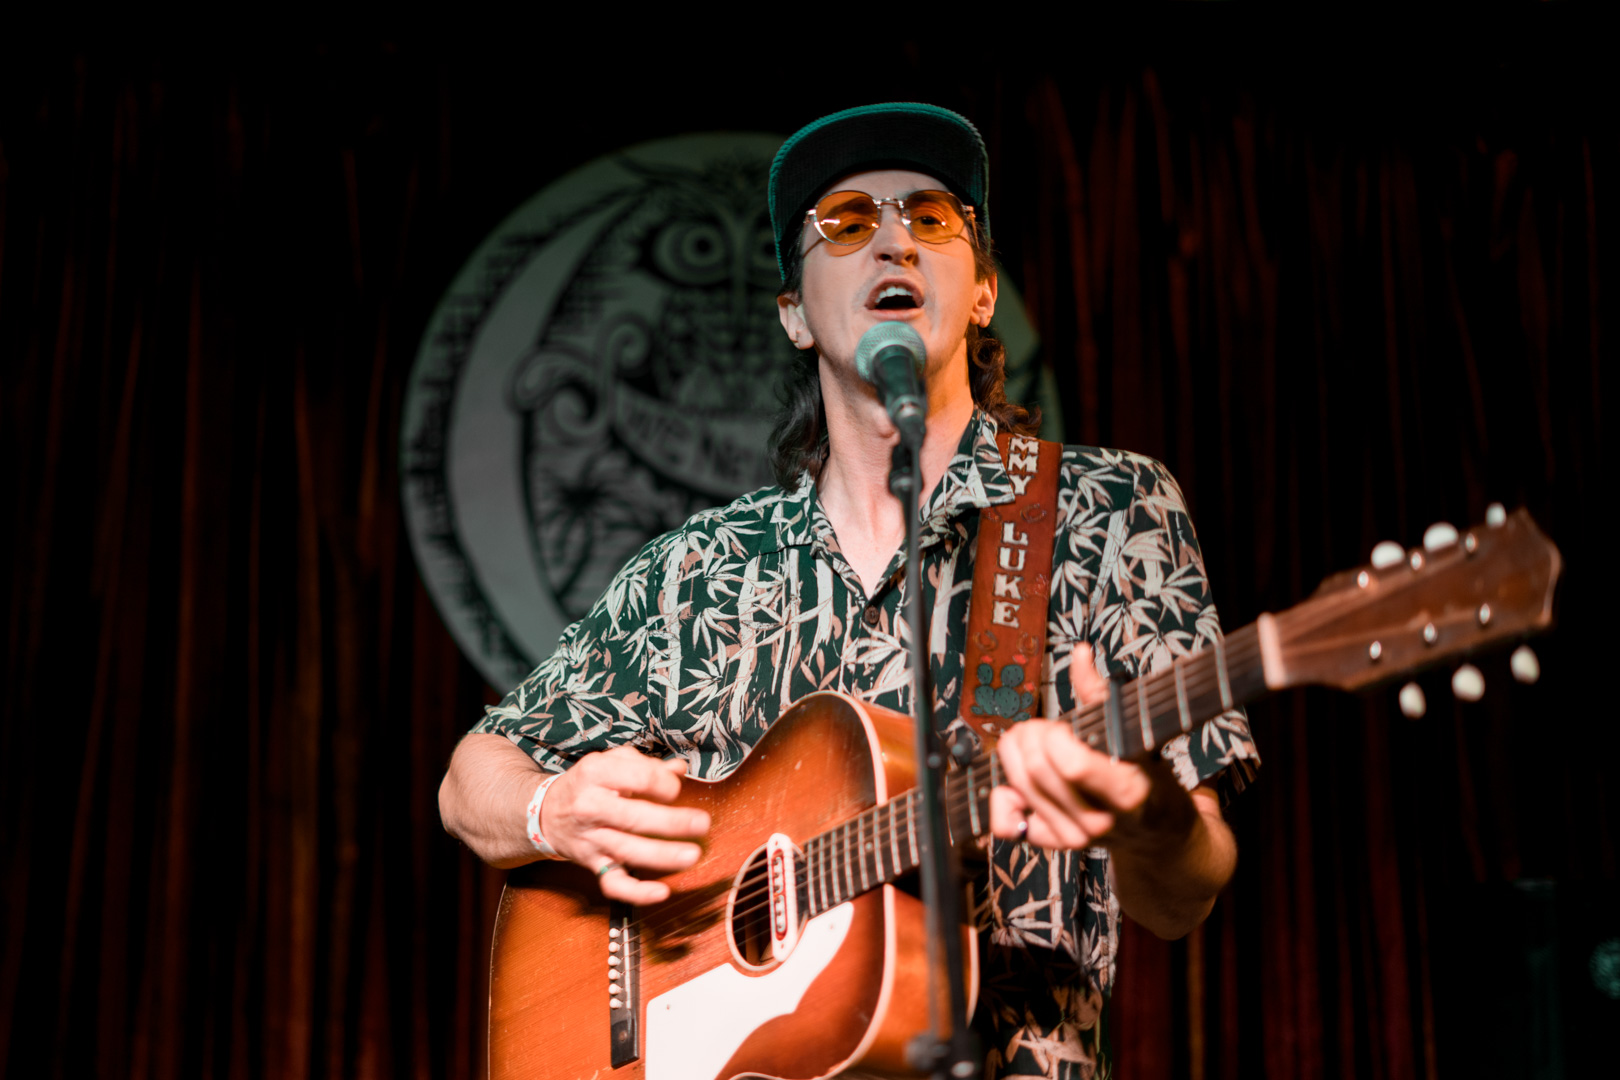 A man in a baseball hat and orange sunglasses plays guitar and sings on stage.